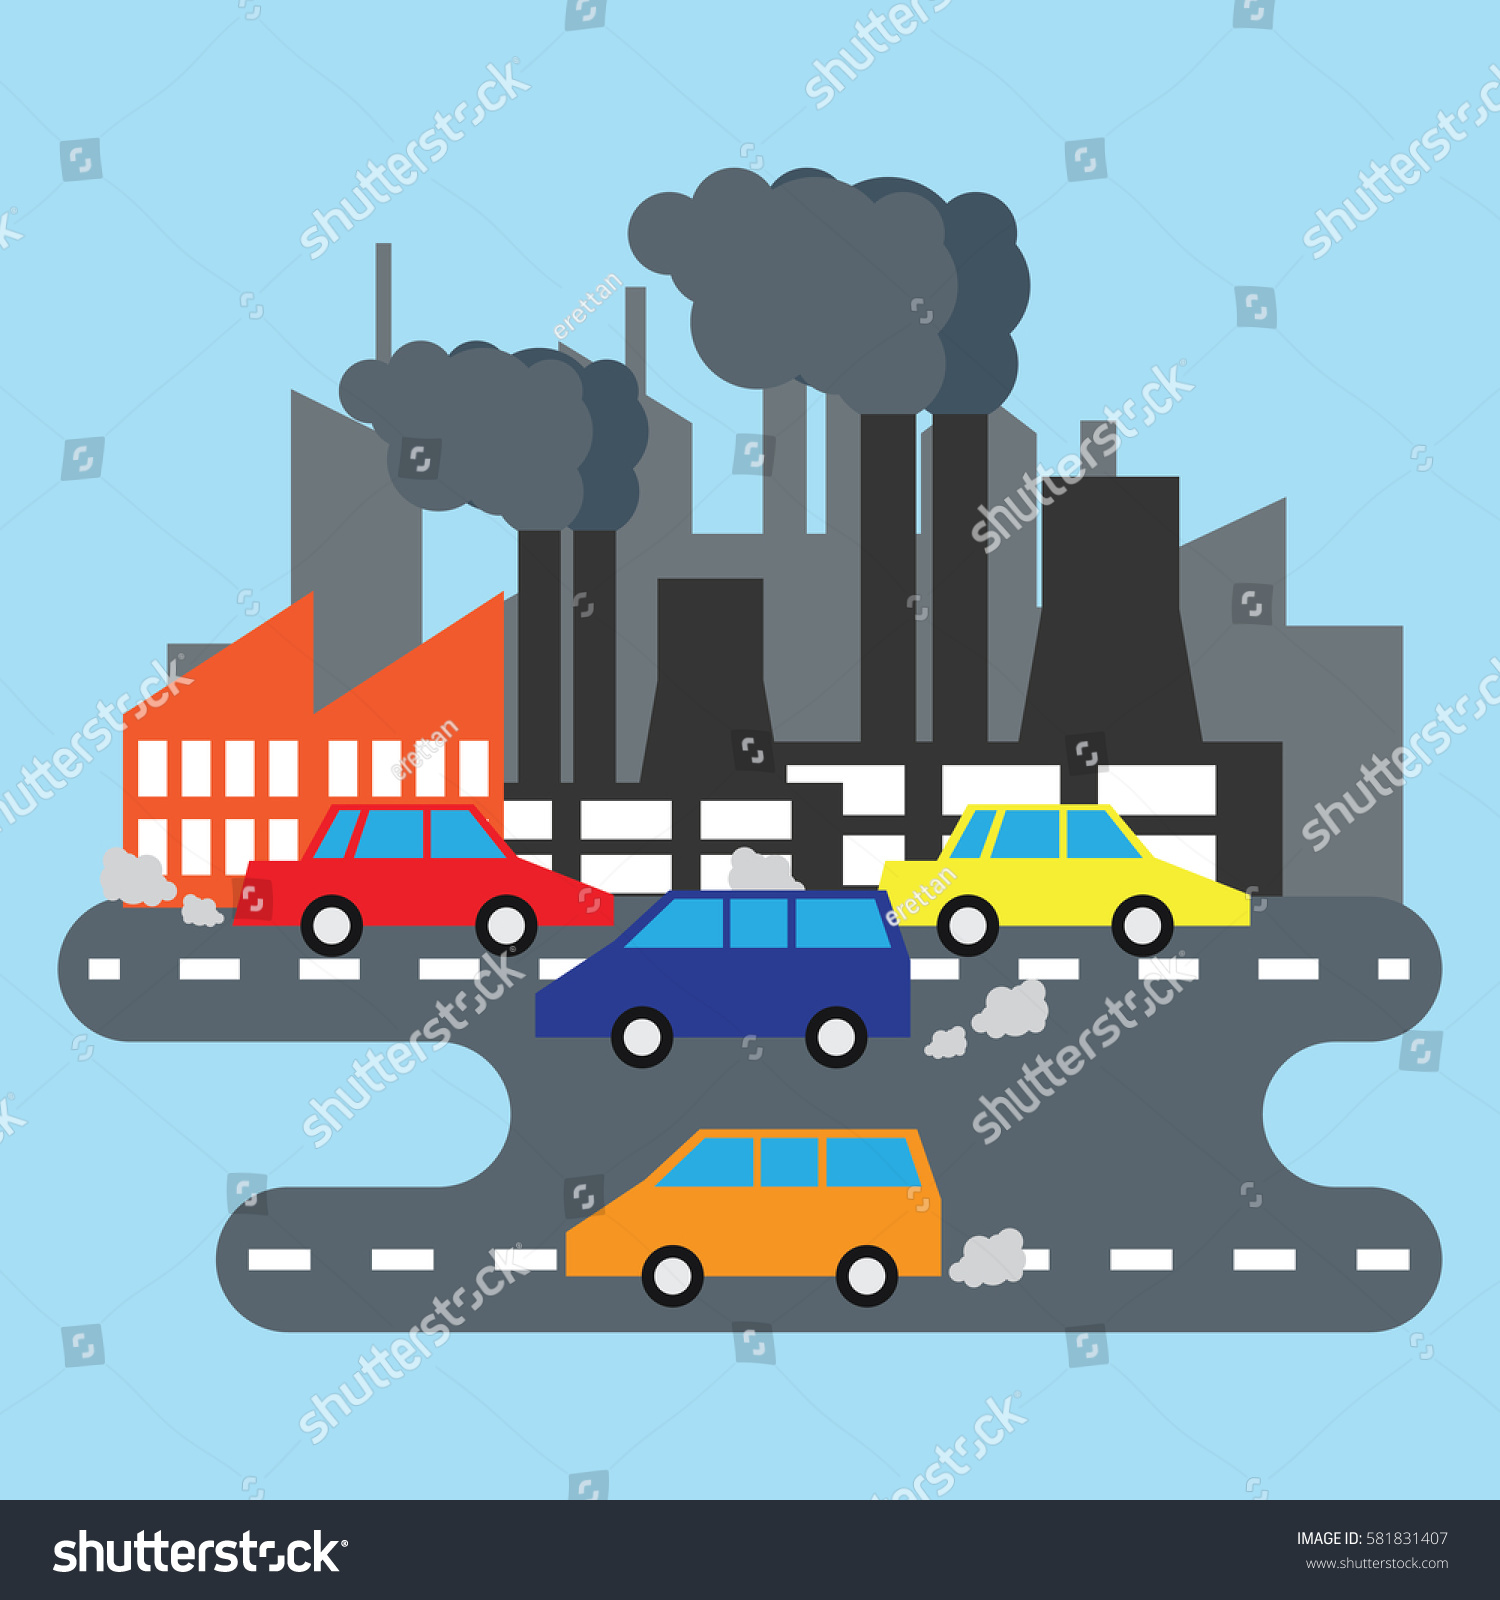 Air Pollution Poster Stock Vector Royalty Free 581831407 1908